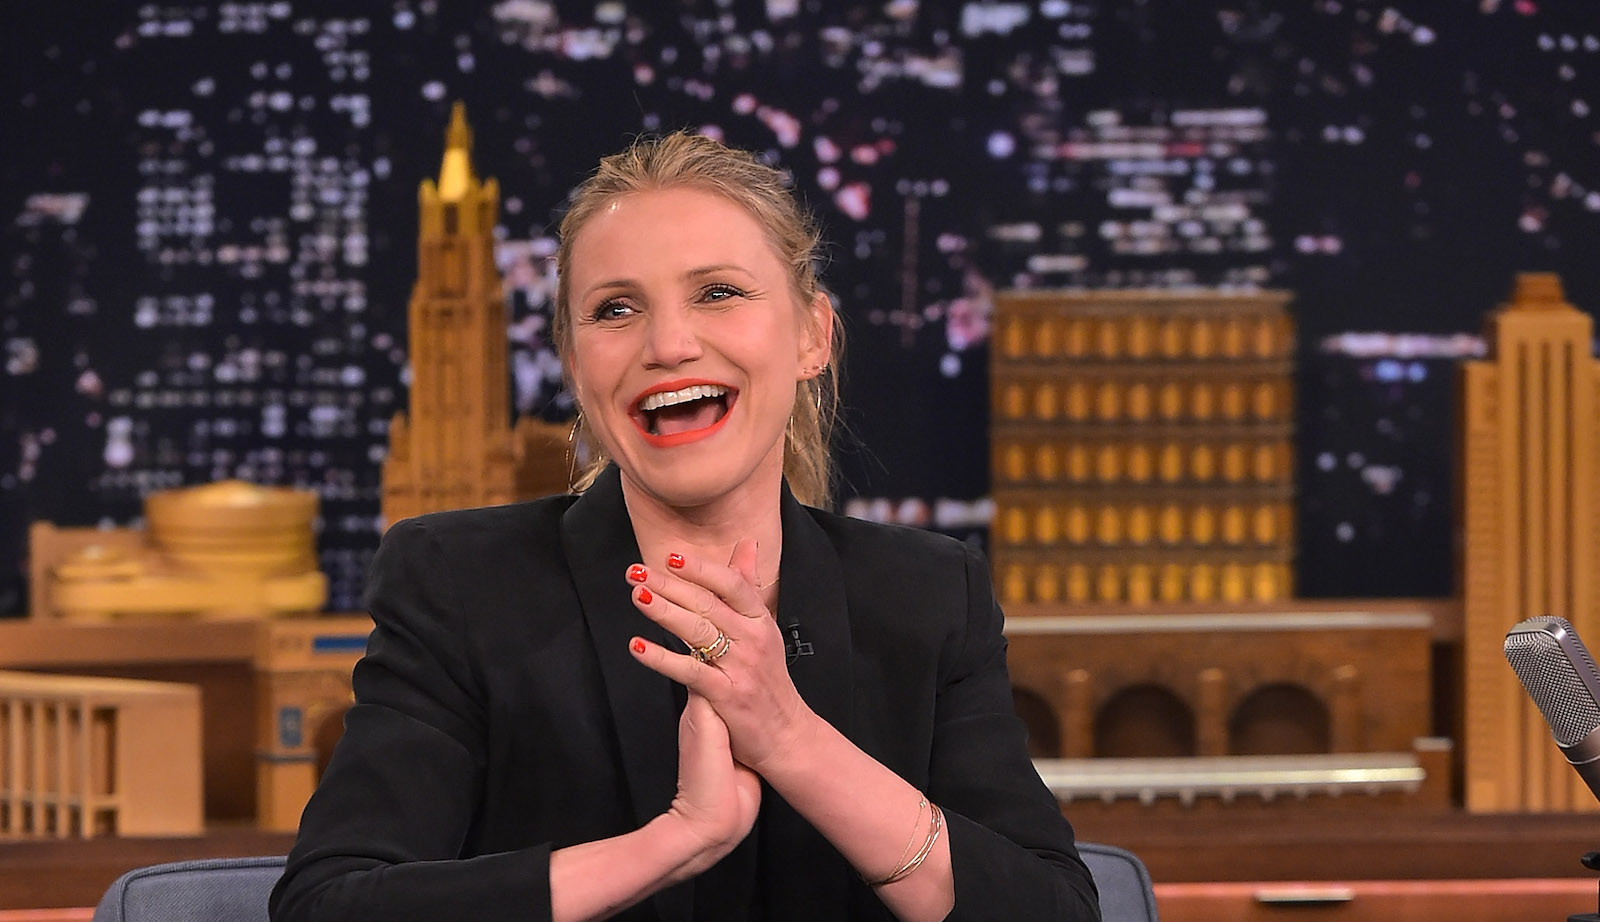 Cameron Diaz sits on the couch during an appearance on Late Night With Jimmy Fallon